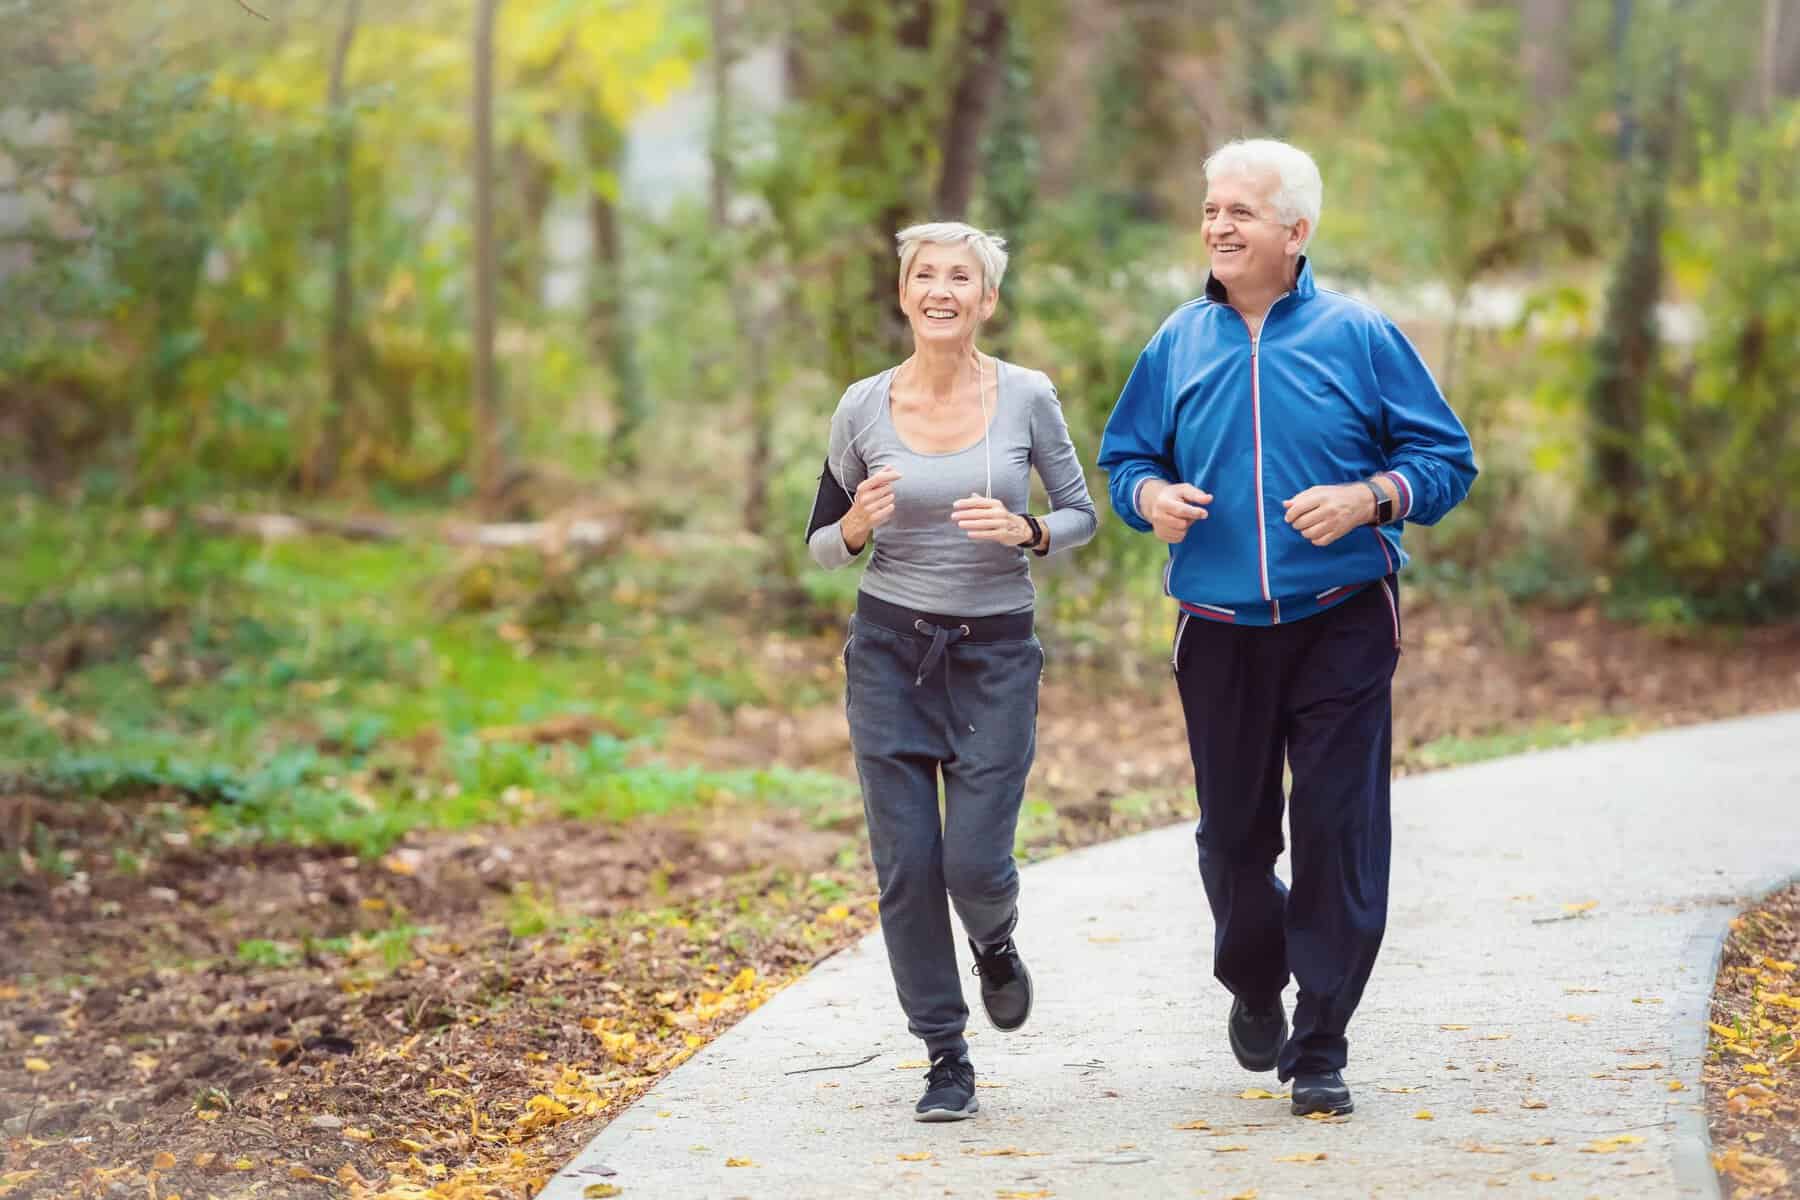 older woman and man out jogging for exercise